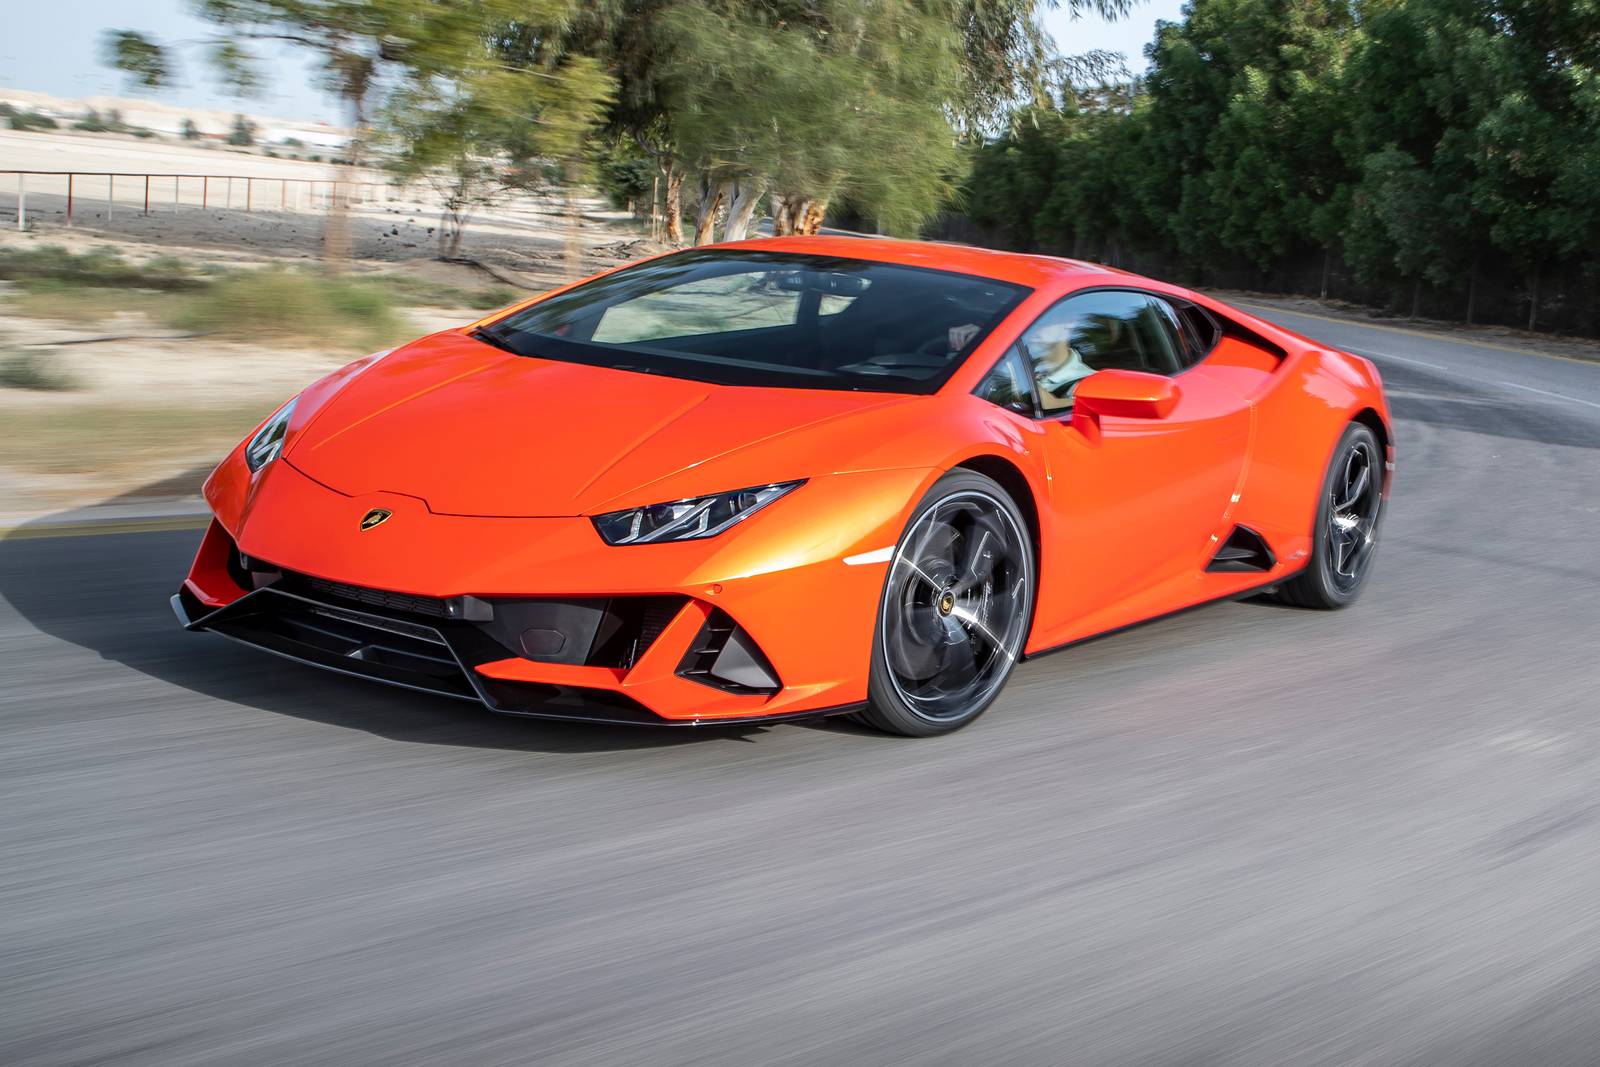 2020 Lamborghini Huracan Prices, Reviews, and Pictures | Edmunds